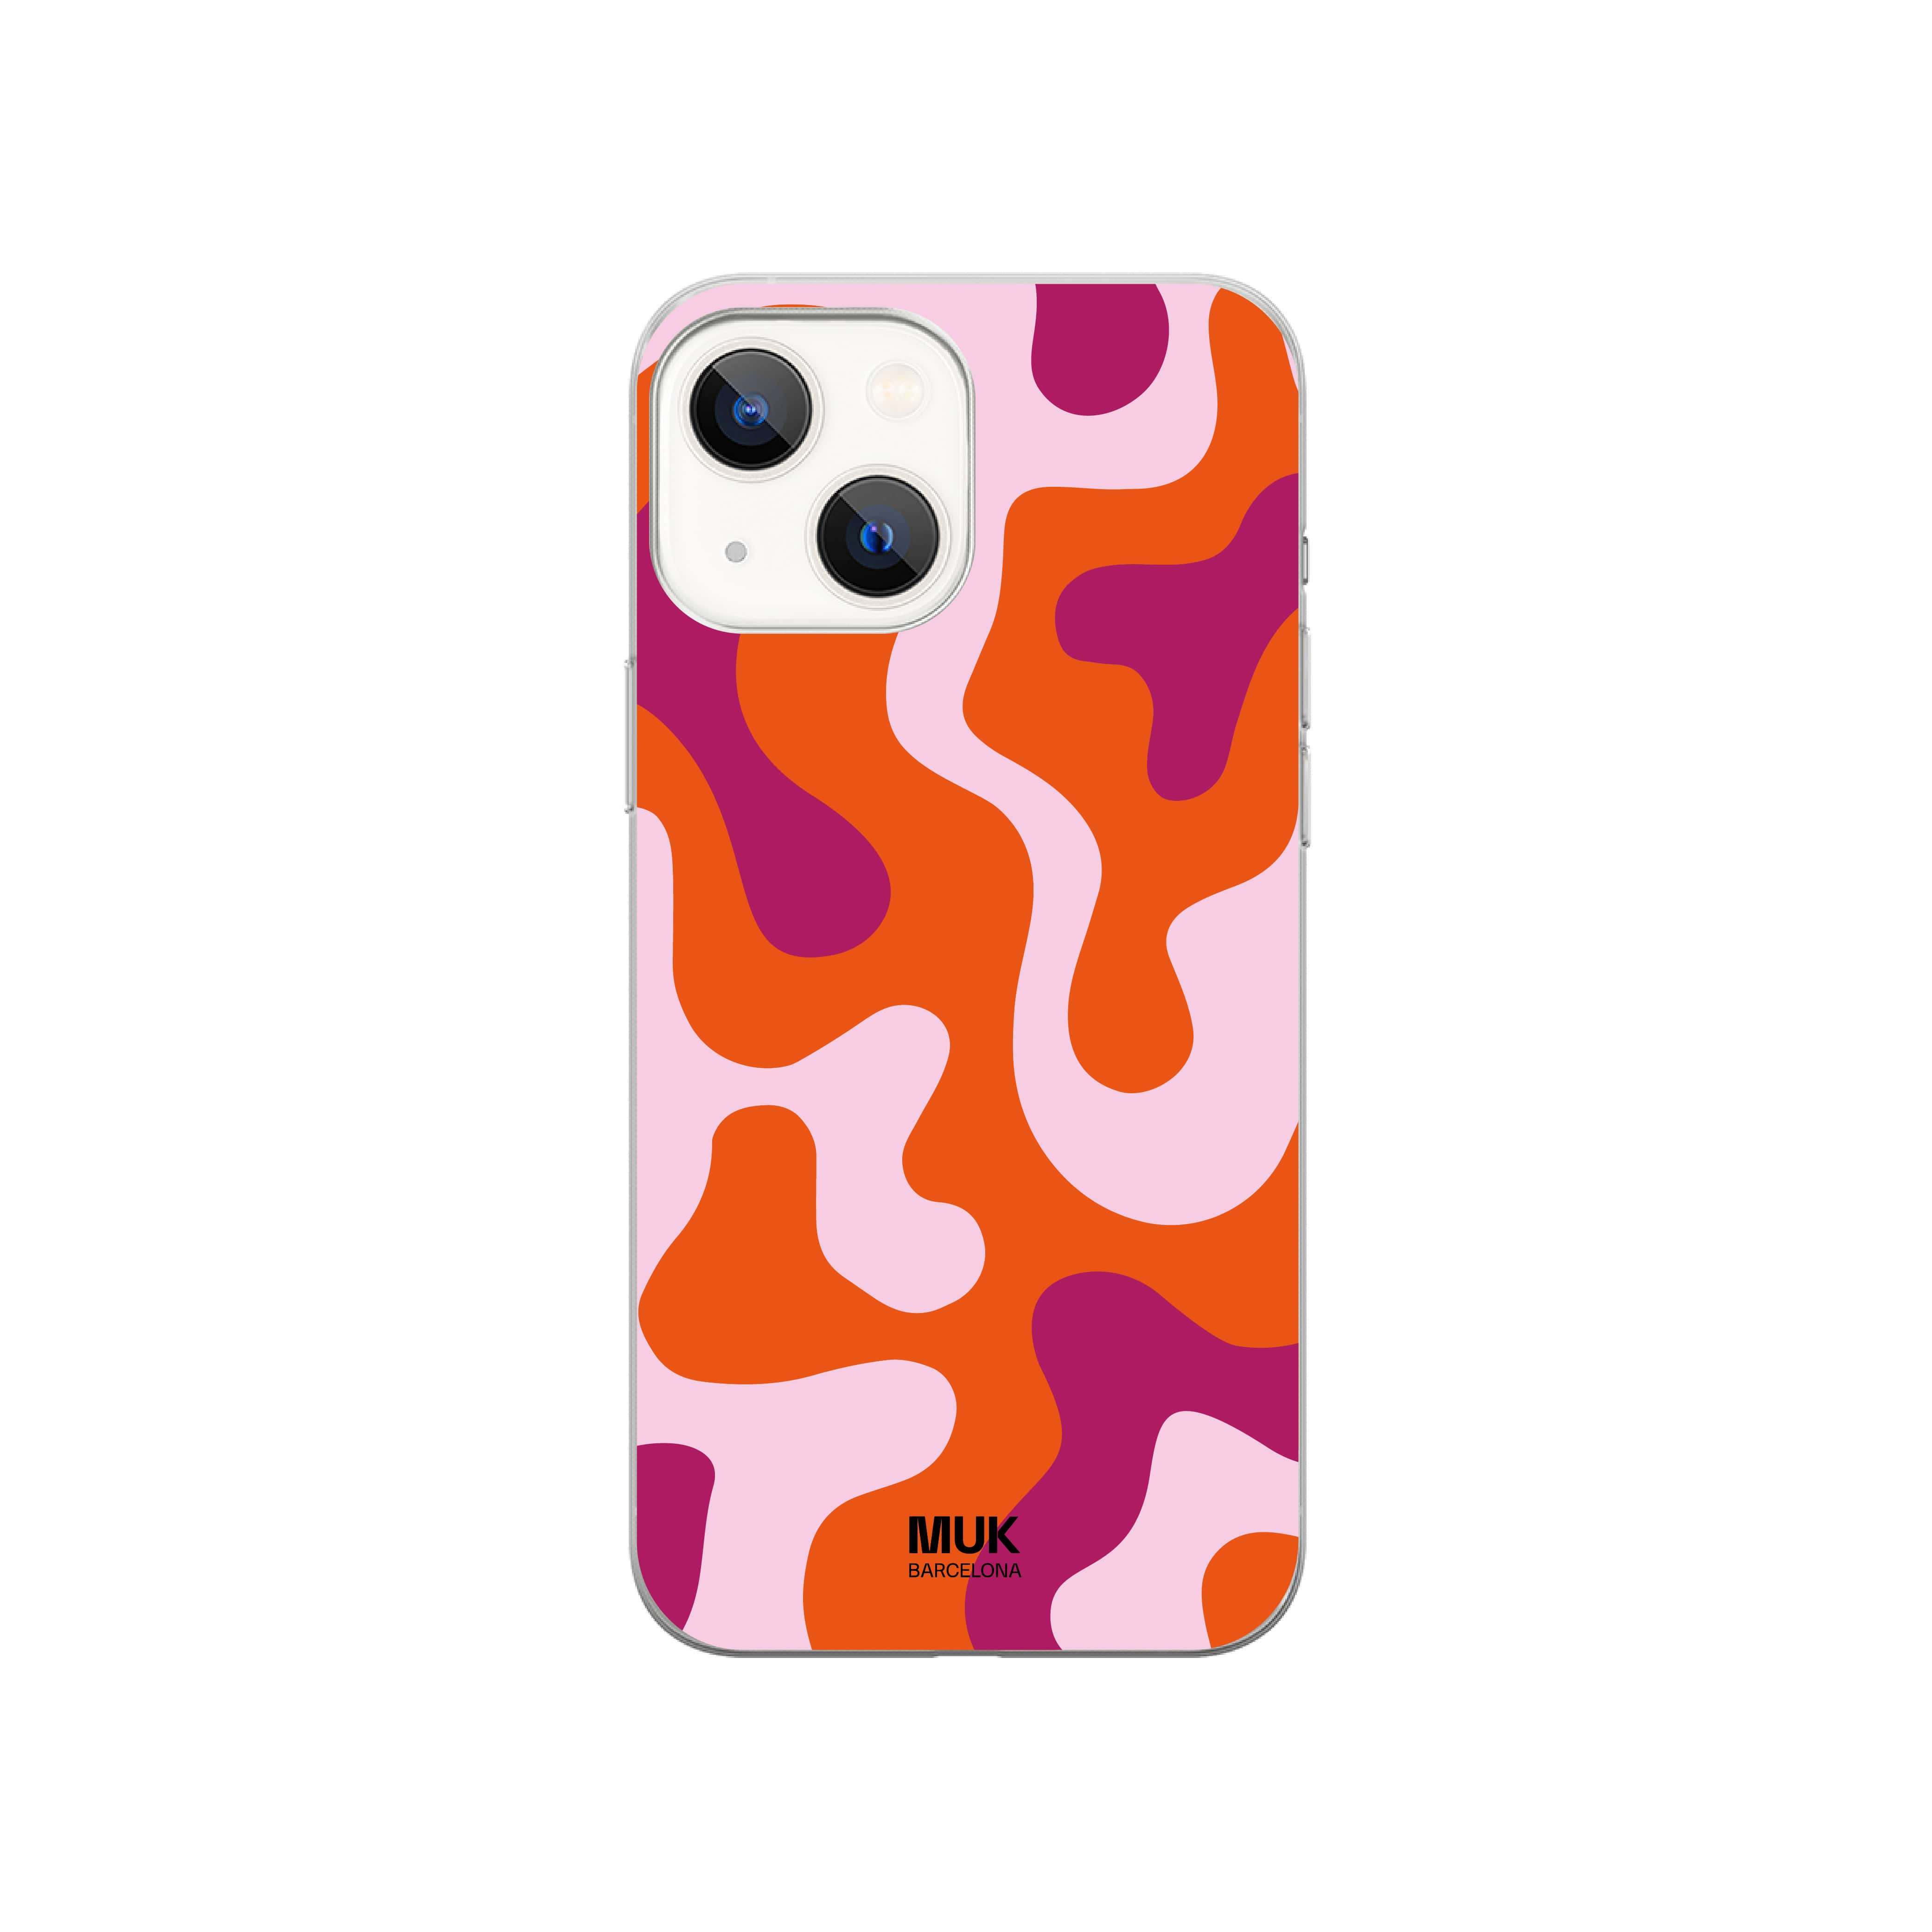 Clear&nbsp;phone case with orange, lilac and violet organic shapes.
